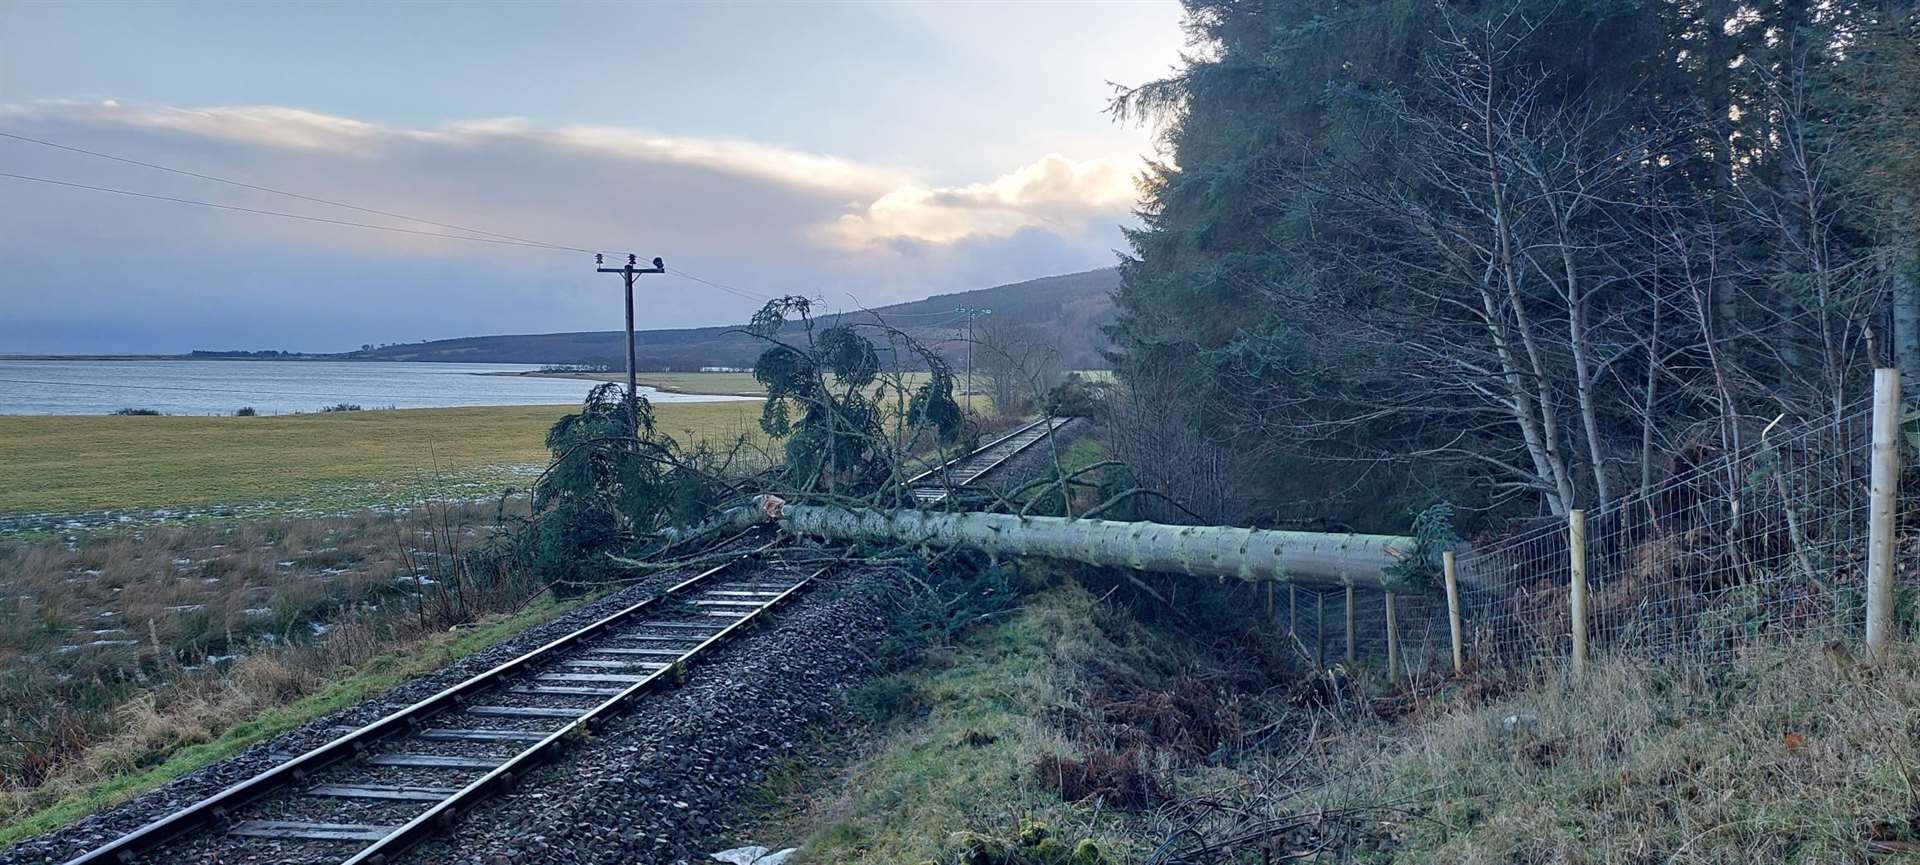 The fallen tree on the rail line at Tain.